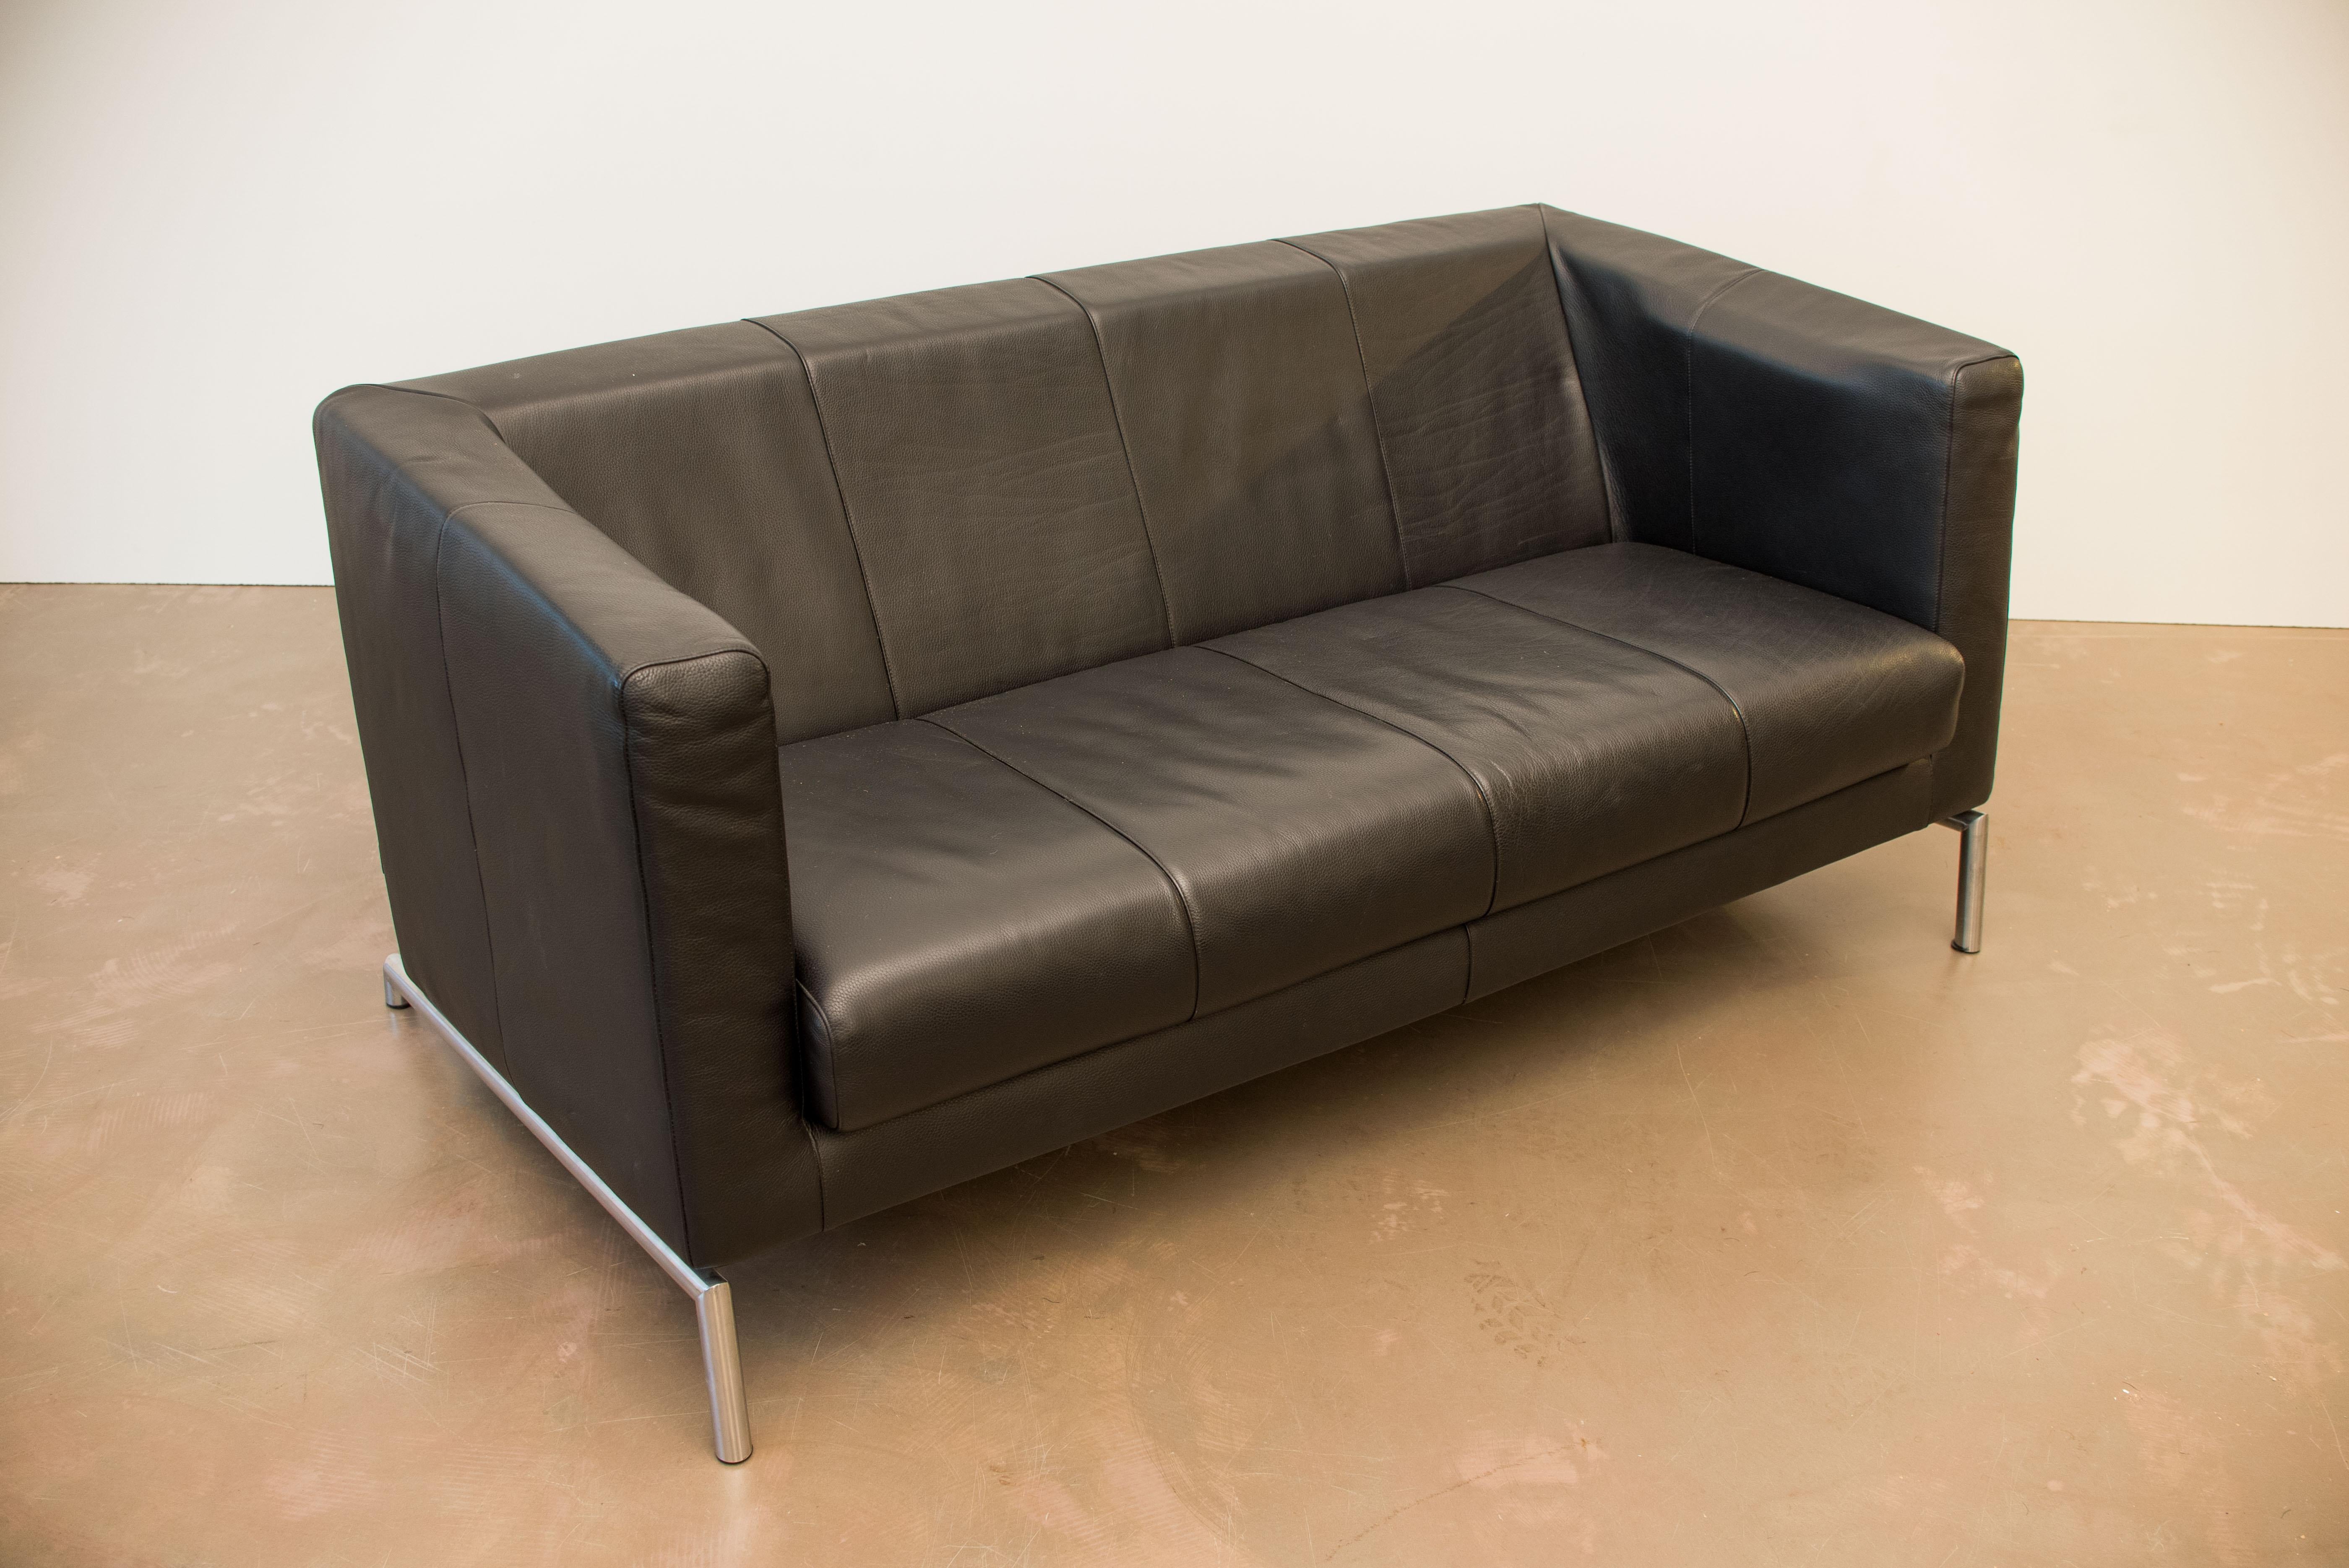 Mid-Century leather sofa from Montis
This three-seat sofa features upholstery in black leather.